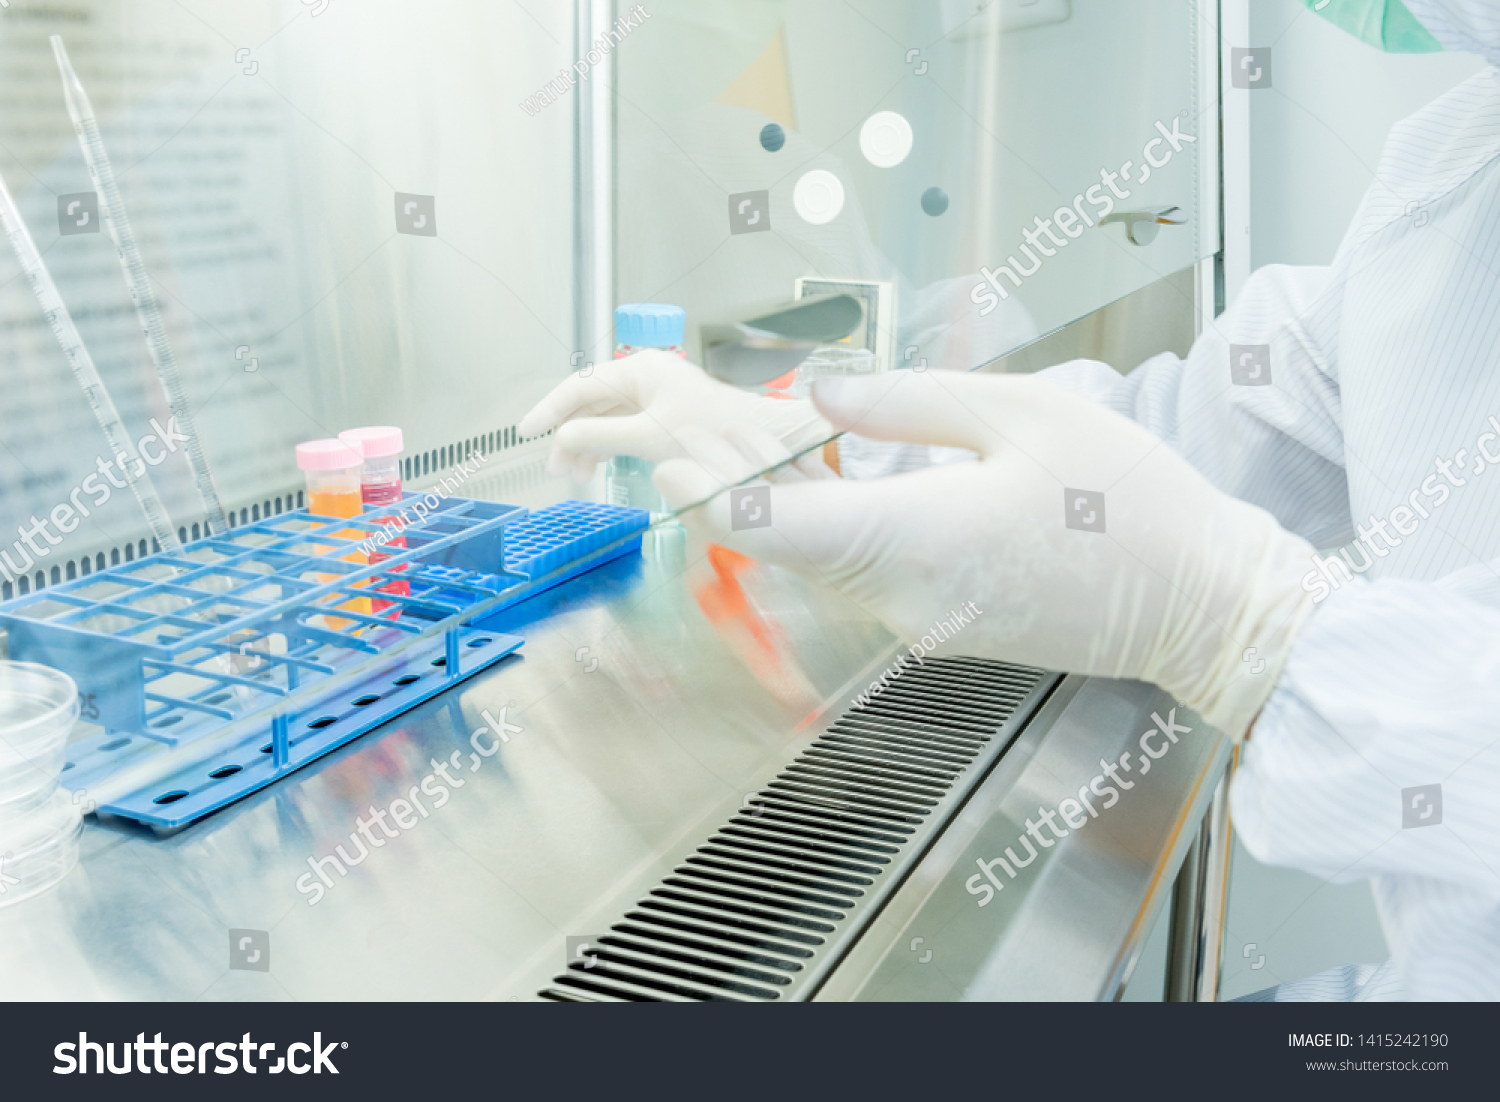 A scientist in sterile coverall gown preparing growth medium and reagent for cell cuture assay in biological safety cabinet (BSC). Doing molecular experiment in cleanroom facility. #1415242190